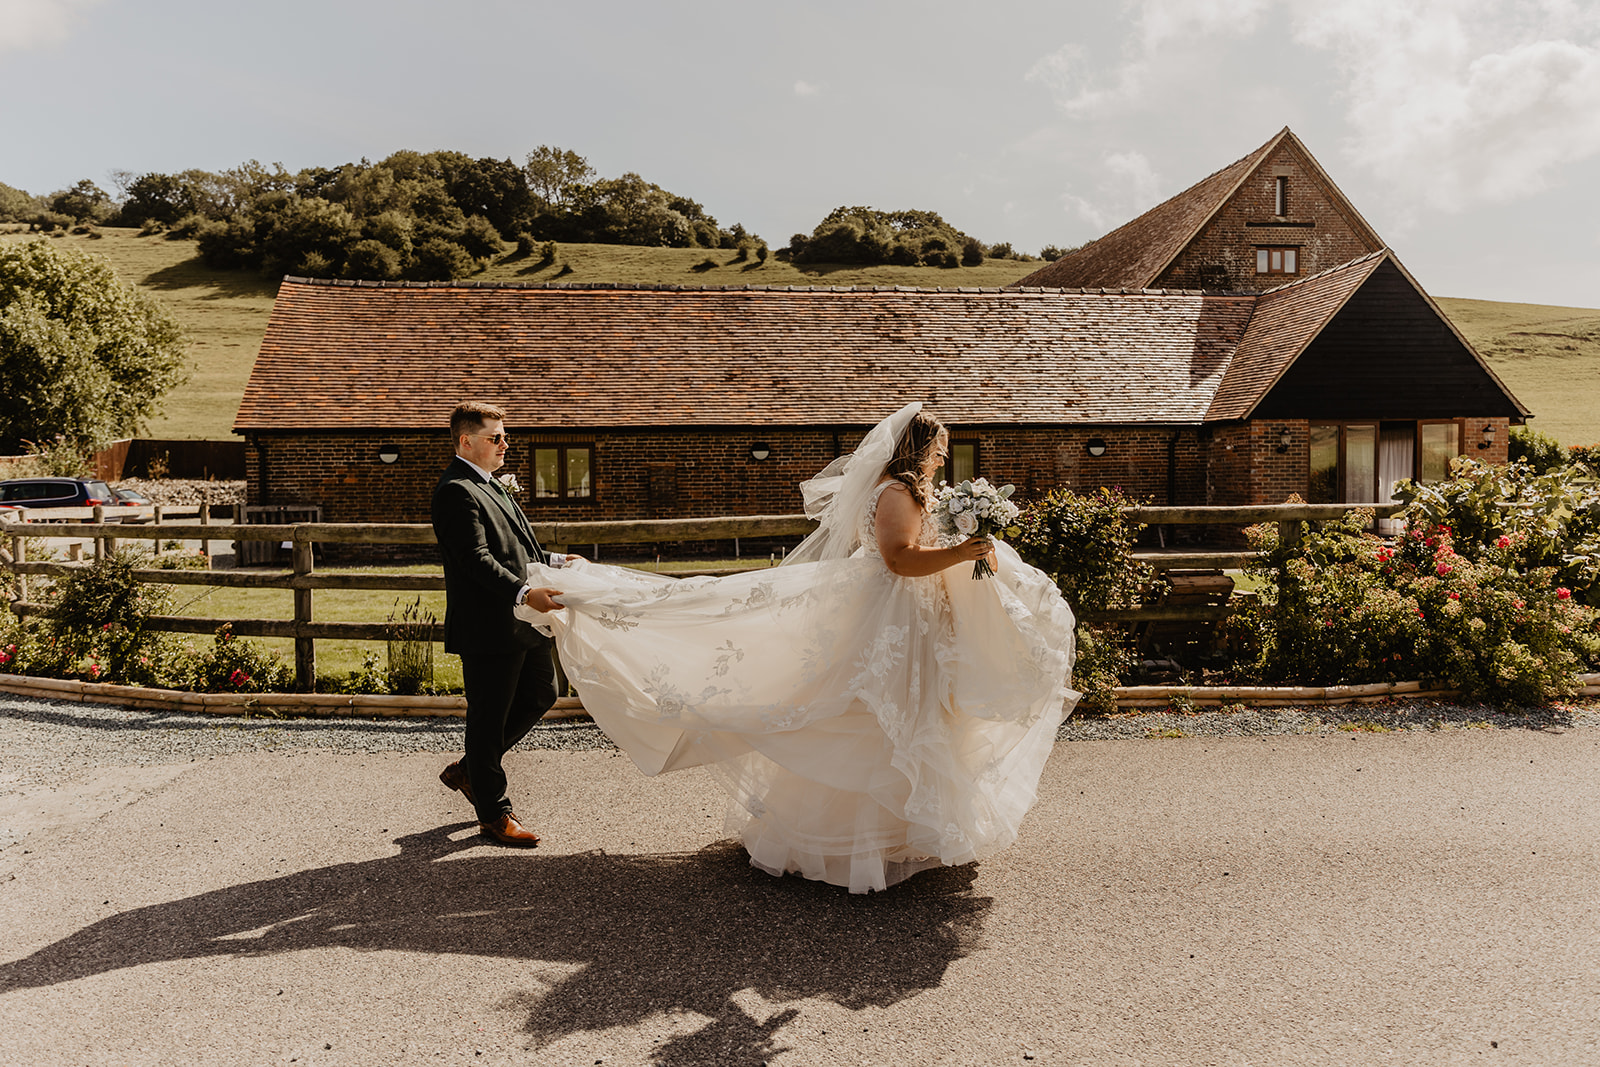 Bride and Groom at a Long Furlong Barn Wedding in Worthing, Sussex. By Olive Joy Photography.